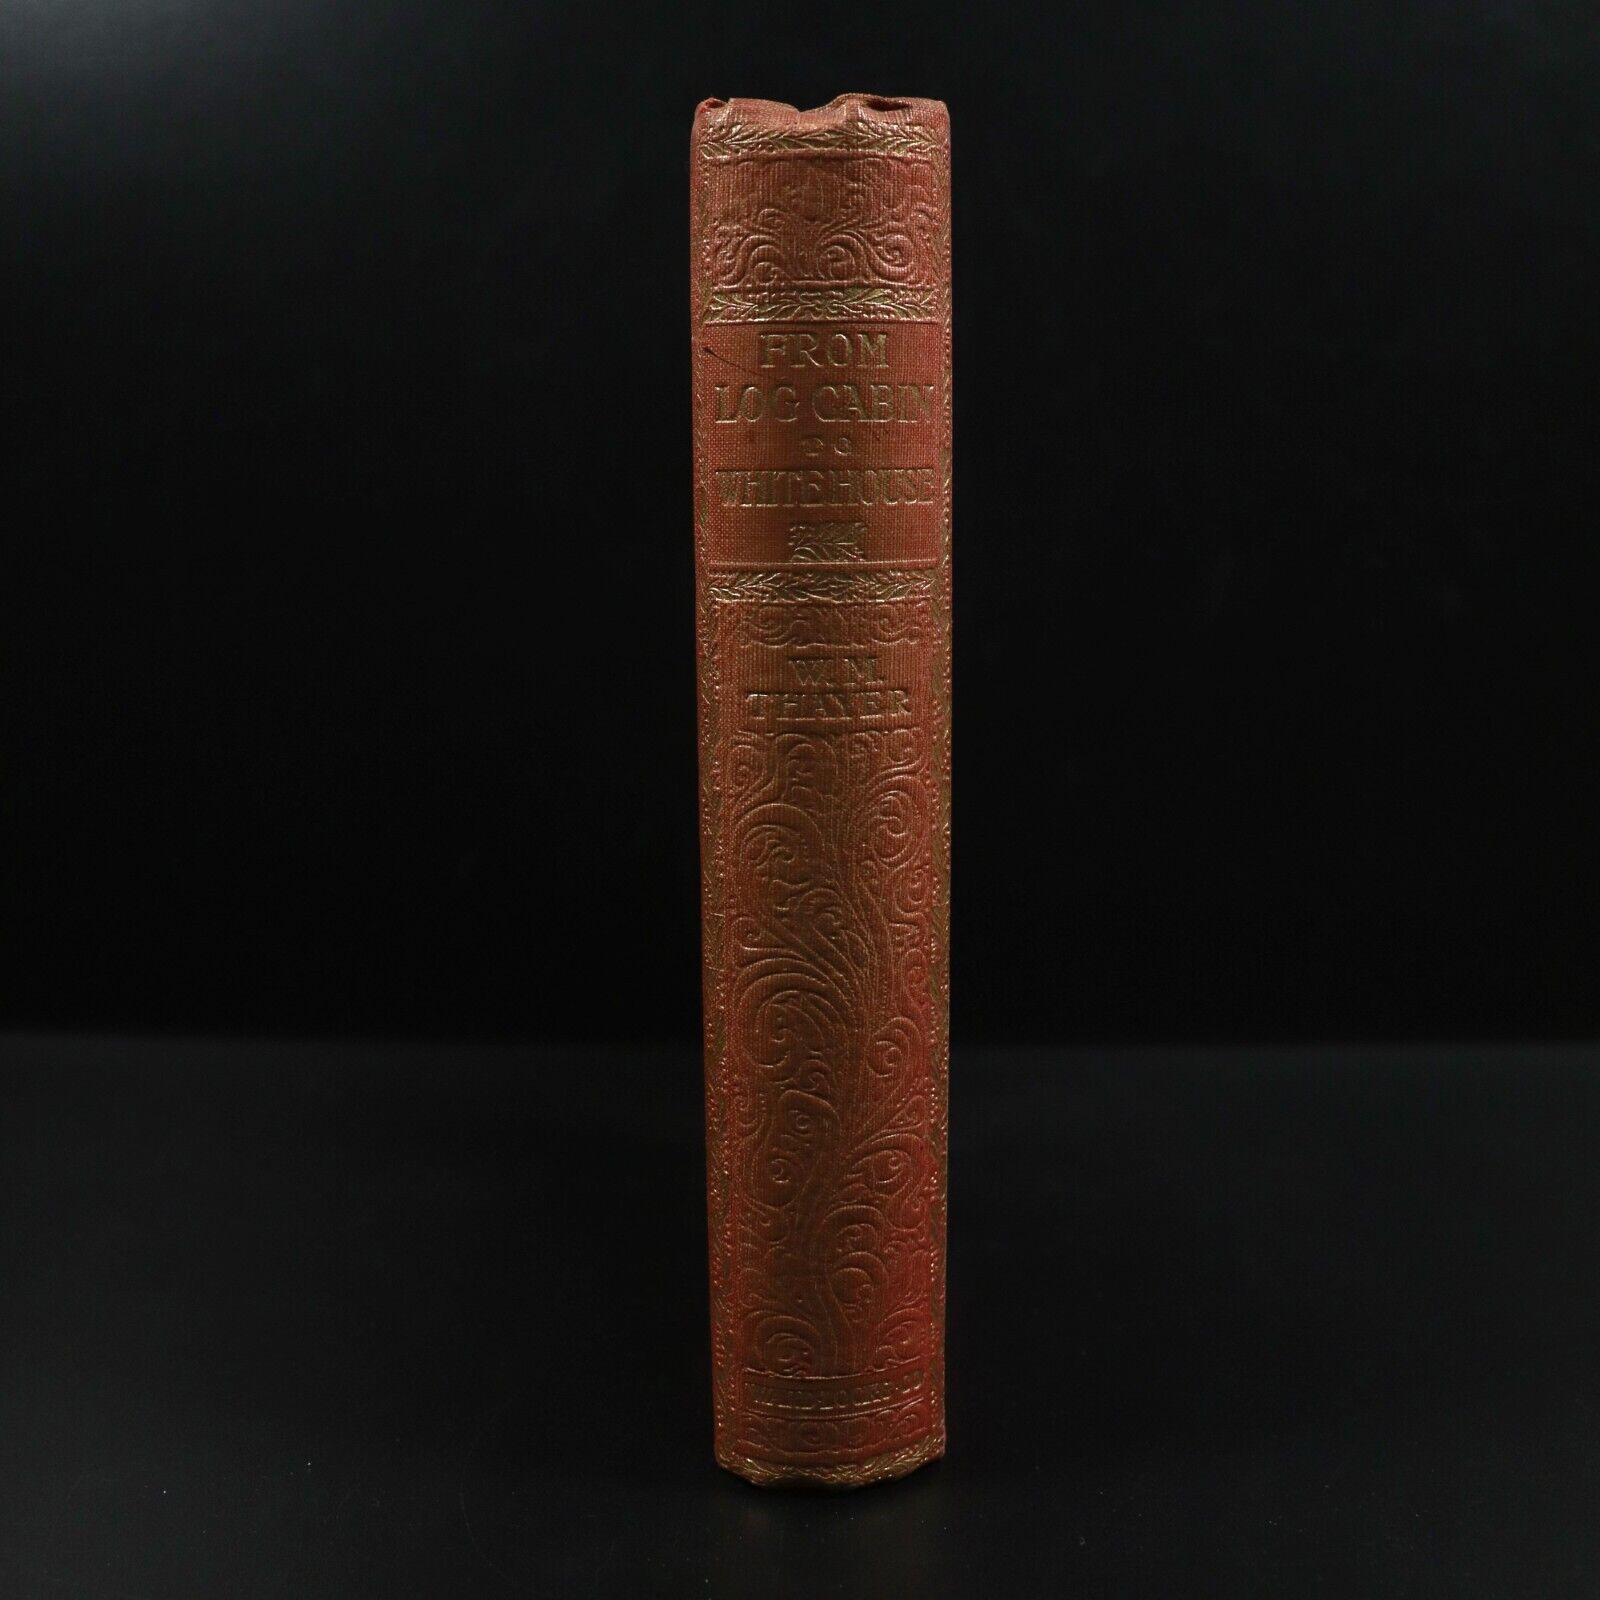 c1895 From Log Cabin To White House W.M. Thayer Antique American History Book - 0